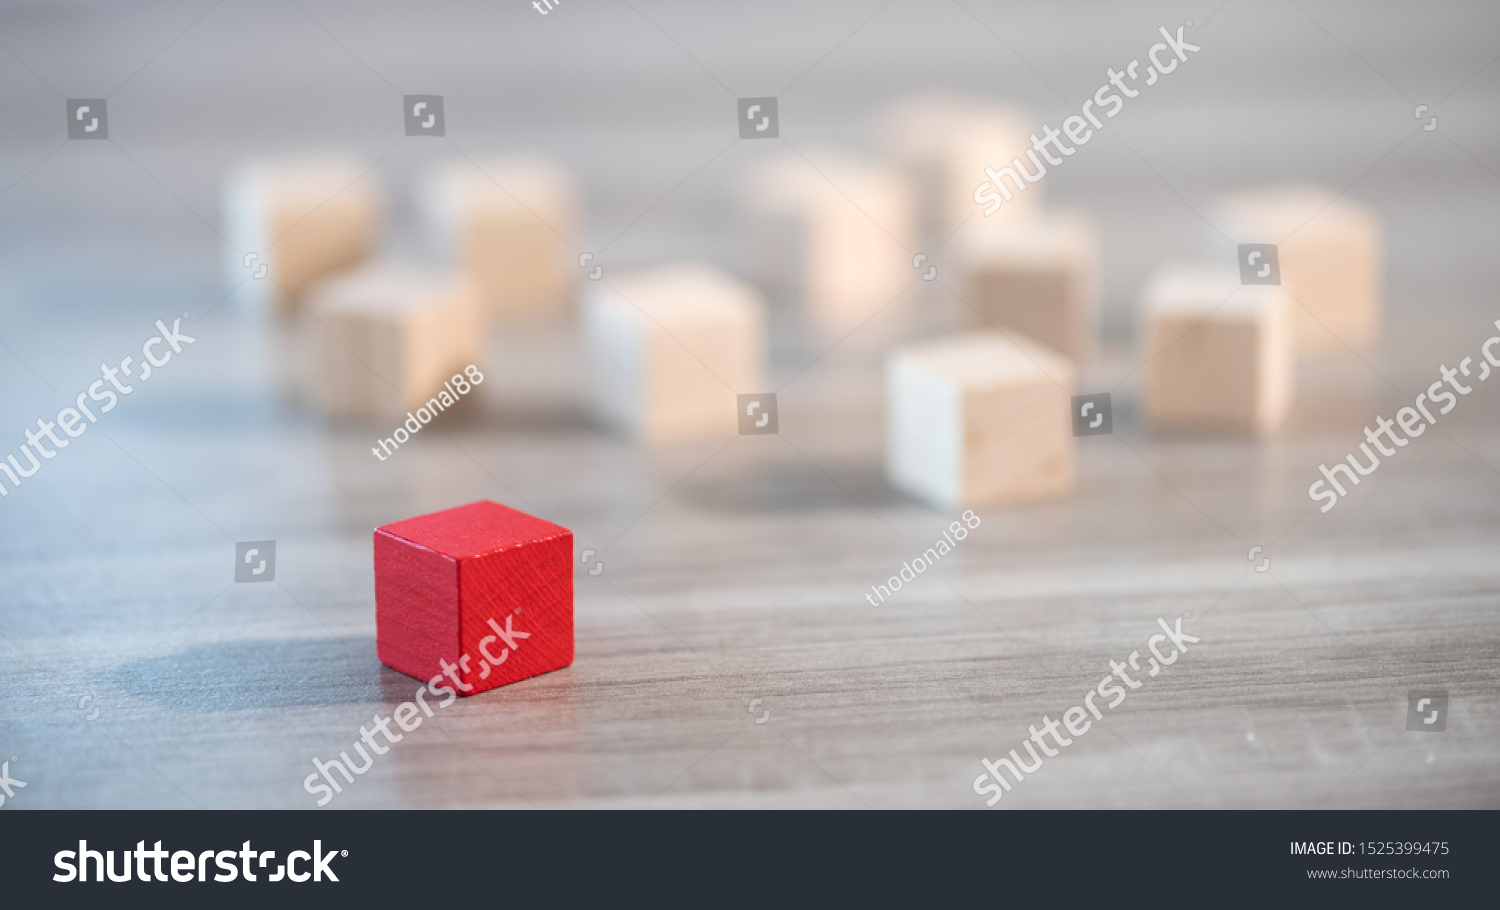 Concept of individuality with wooden cubes #1525399475